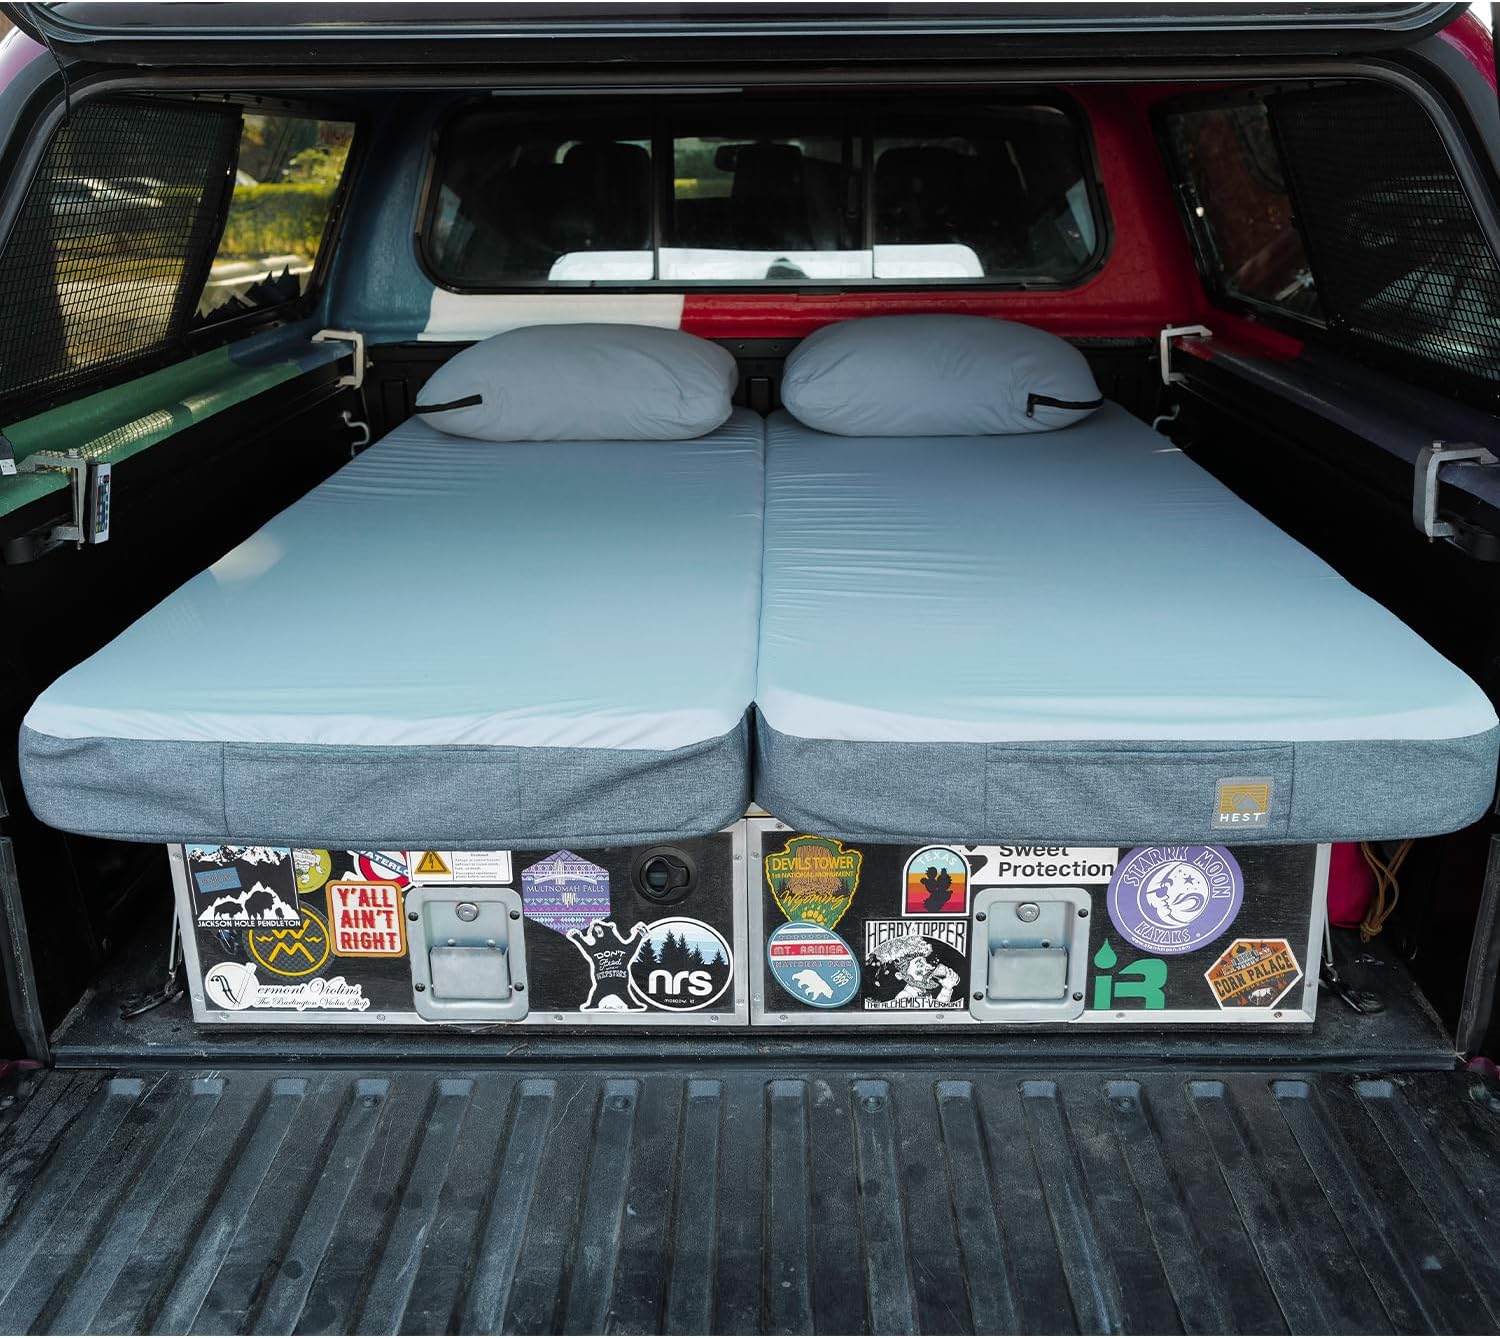 HEST Dually - Portable Camping truck bed mattress